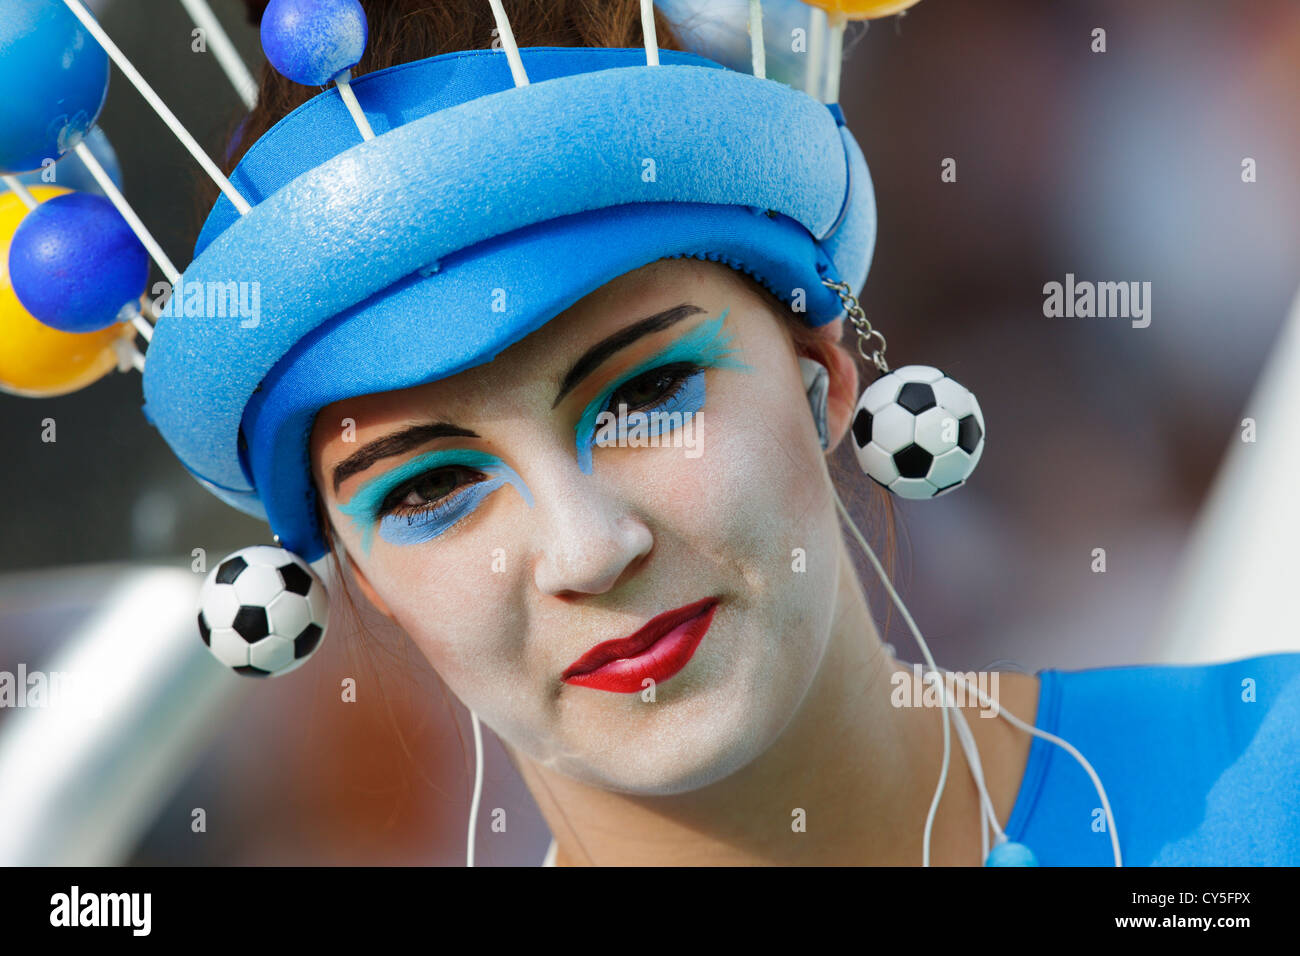 A performer is costumed for the opening ceremony of the 2011 FIFA Women's World Cup soccer tournament in Berlin, Germany. Stock Photo